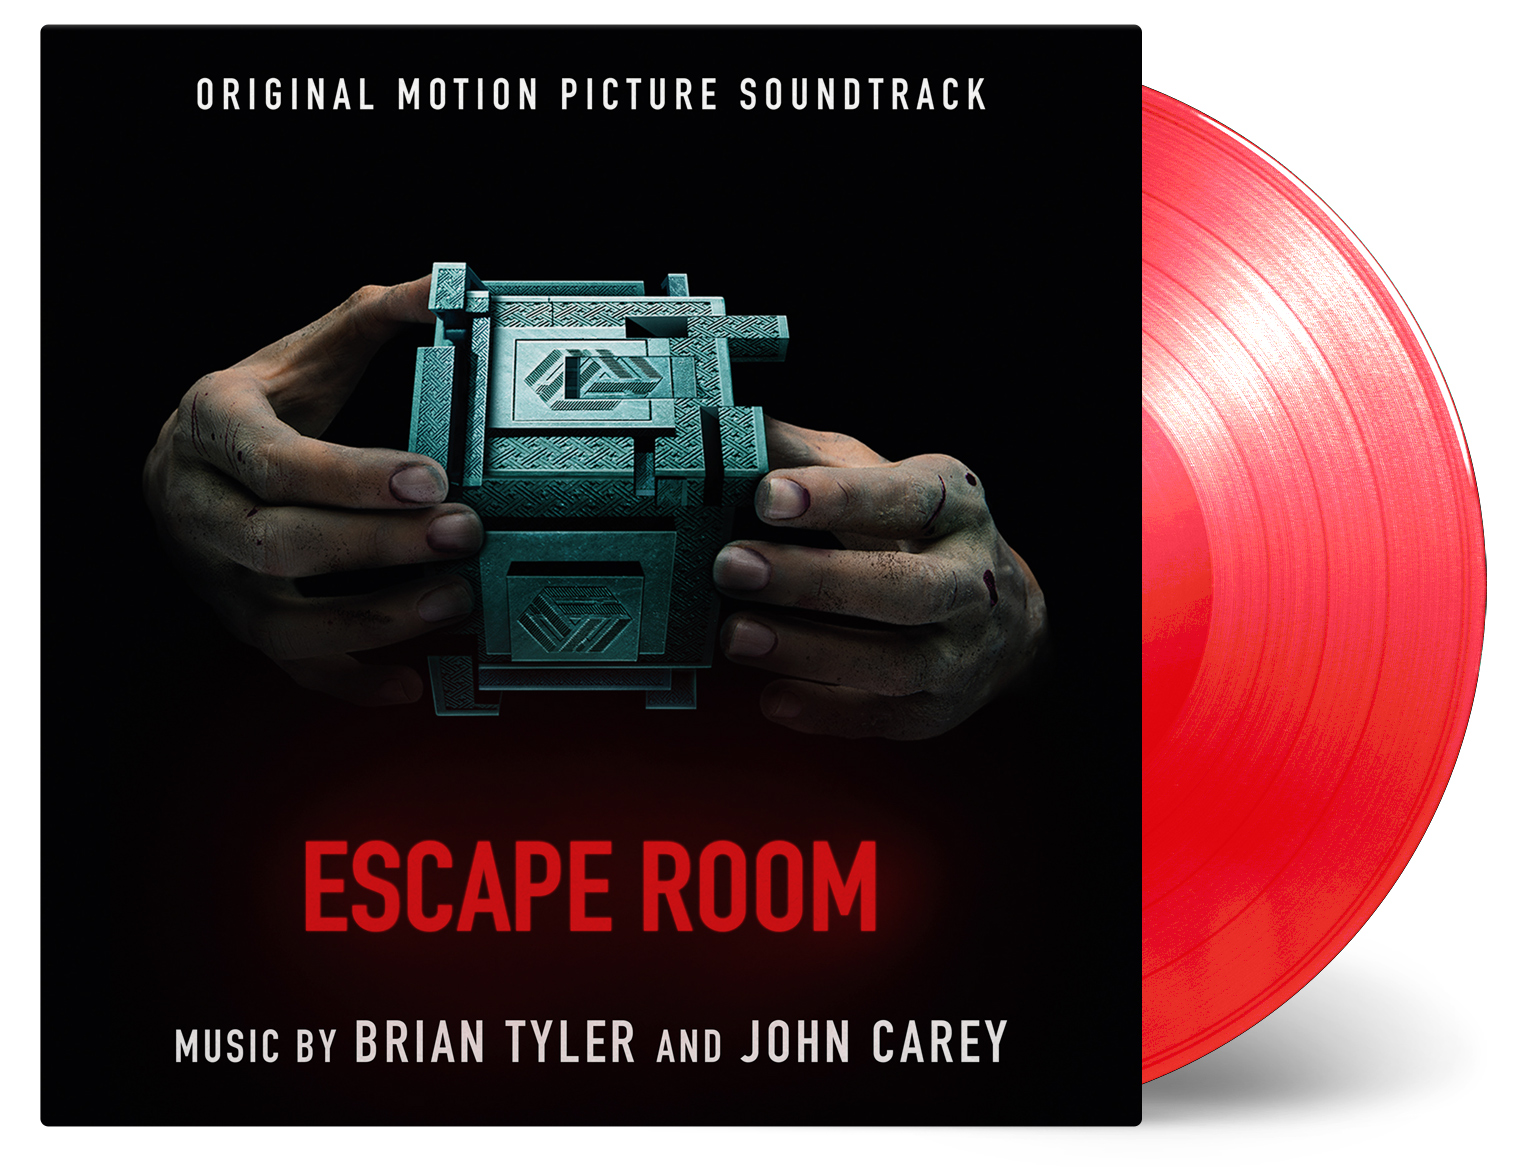 ESCAPE ROOM  - LP 180 GR / LIMITED EDITION 500 COPIES NUMBERED - TRANSPARENT RE